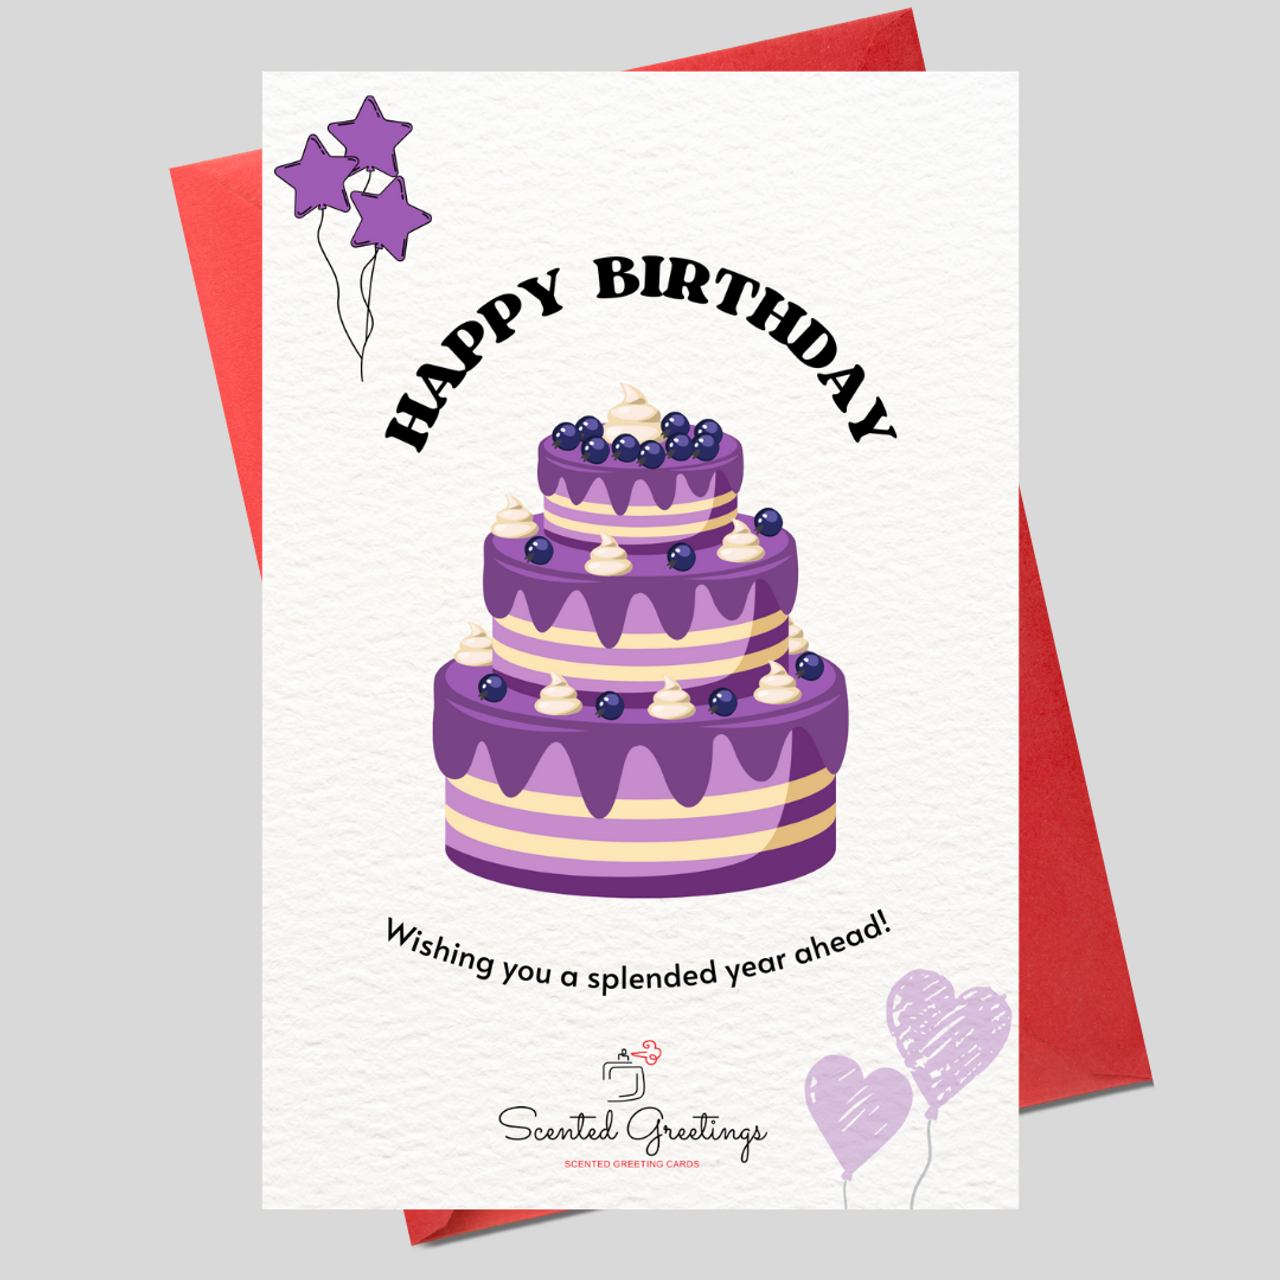 Happy Birthday | Scented Greeting Cards - Bath Bombs | Best Bath Bombs ...